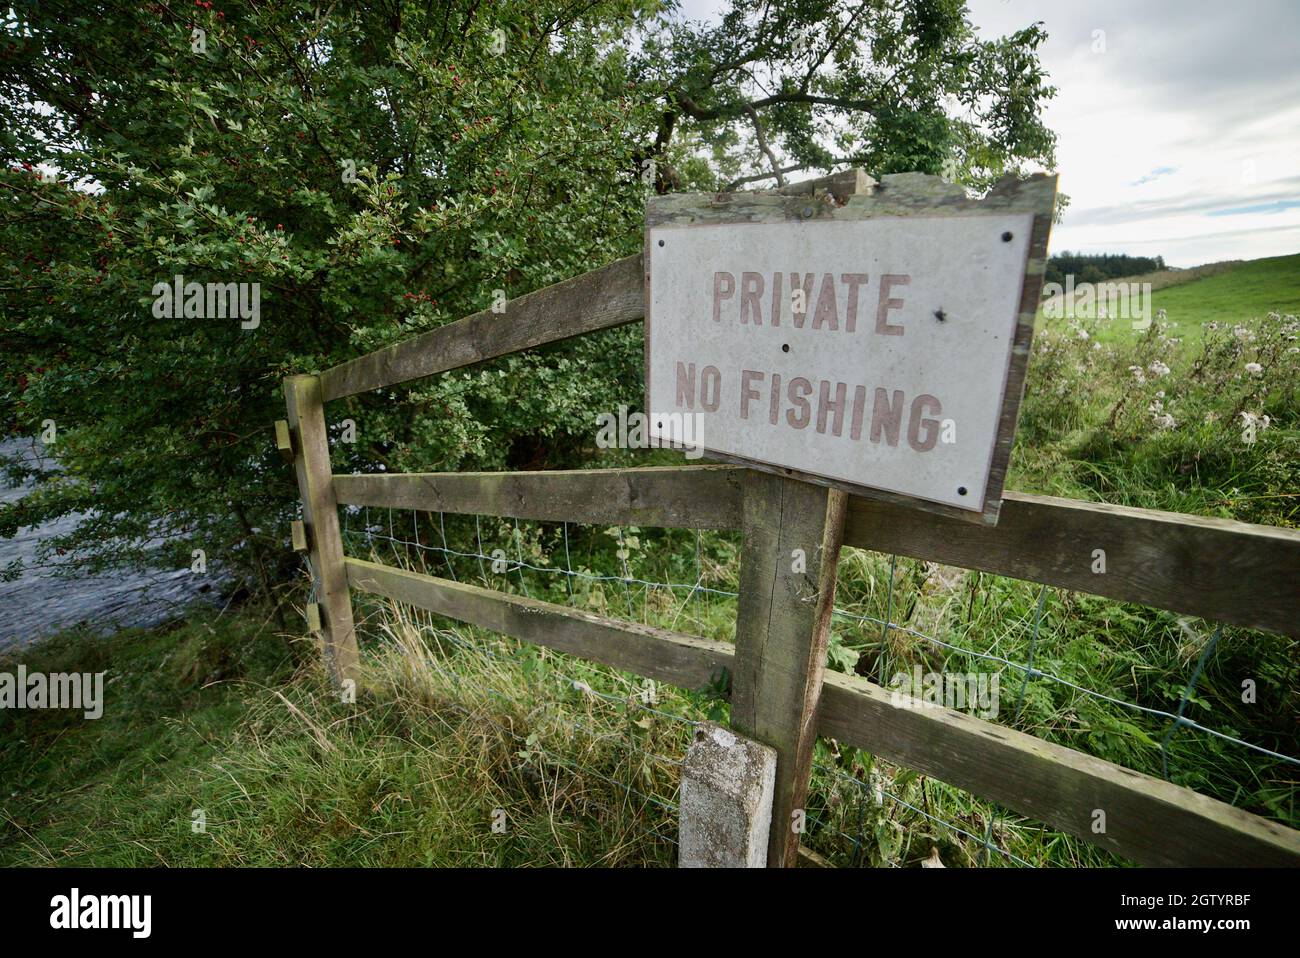 PRIVATE- NO FISHING sign on a fence next to a river/stream in Northumberland, UK. A wooden fence with a sign post saying 'Private No Fishing'. Stock Photo